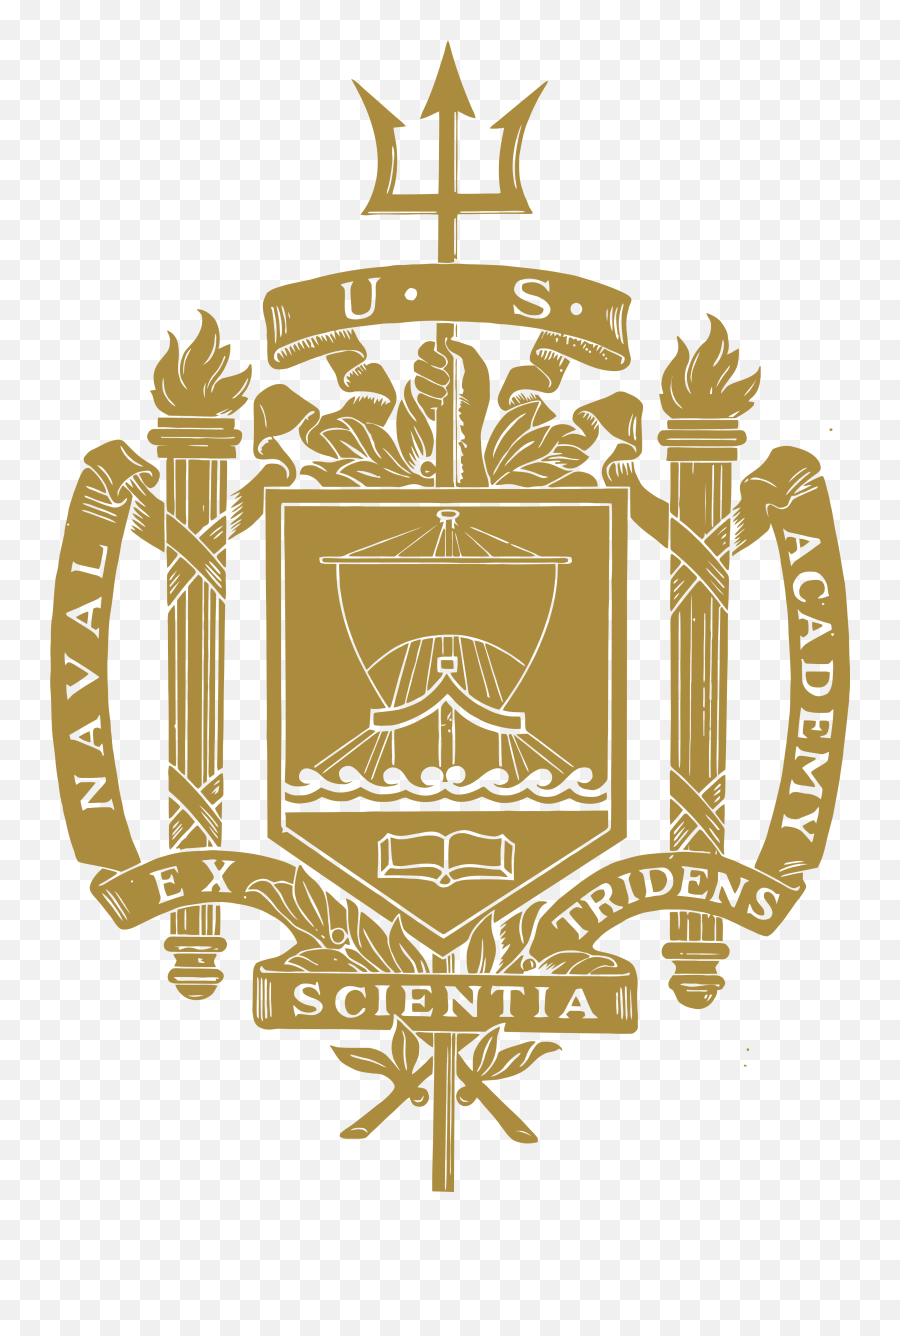 United States Naval Academy - Naval Academy Tattoos Png,Navy Logo Png